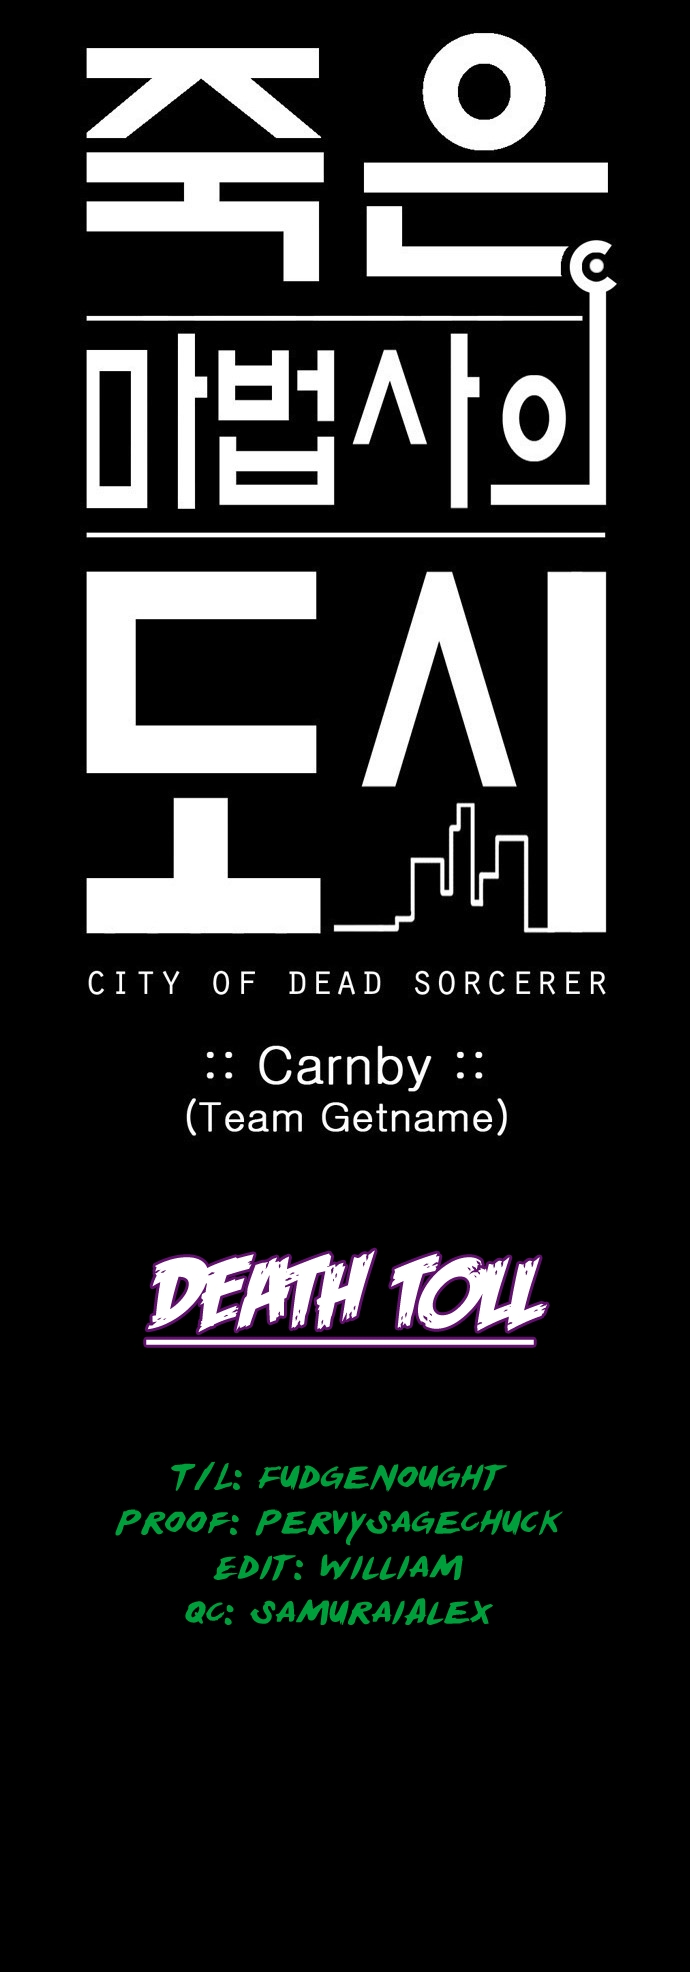 City of the Dead Sorcerer Ch. 0 Prologue